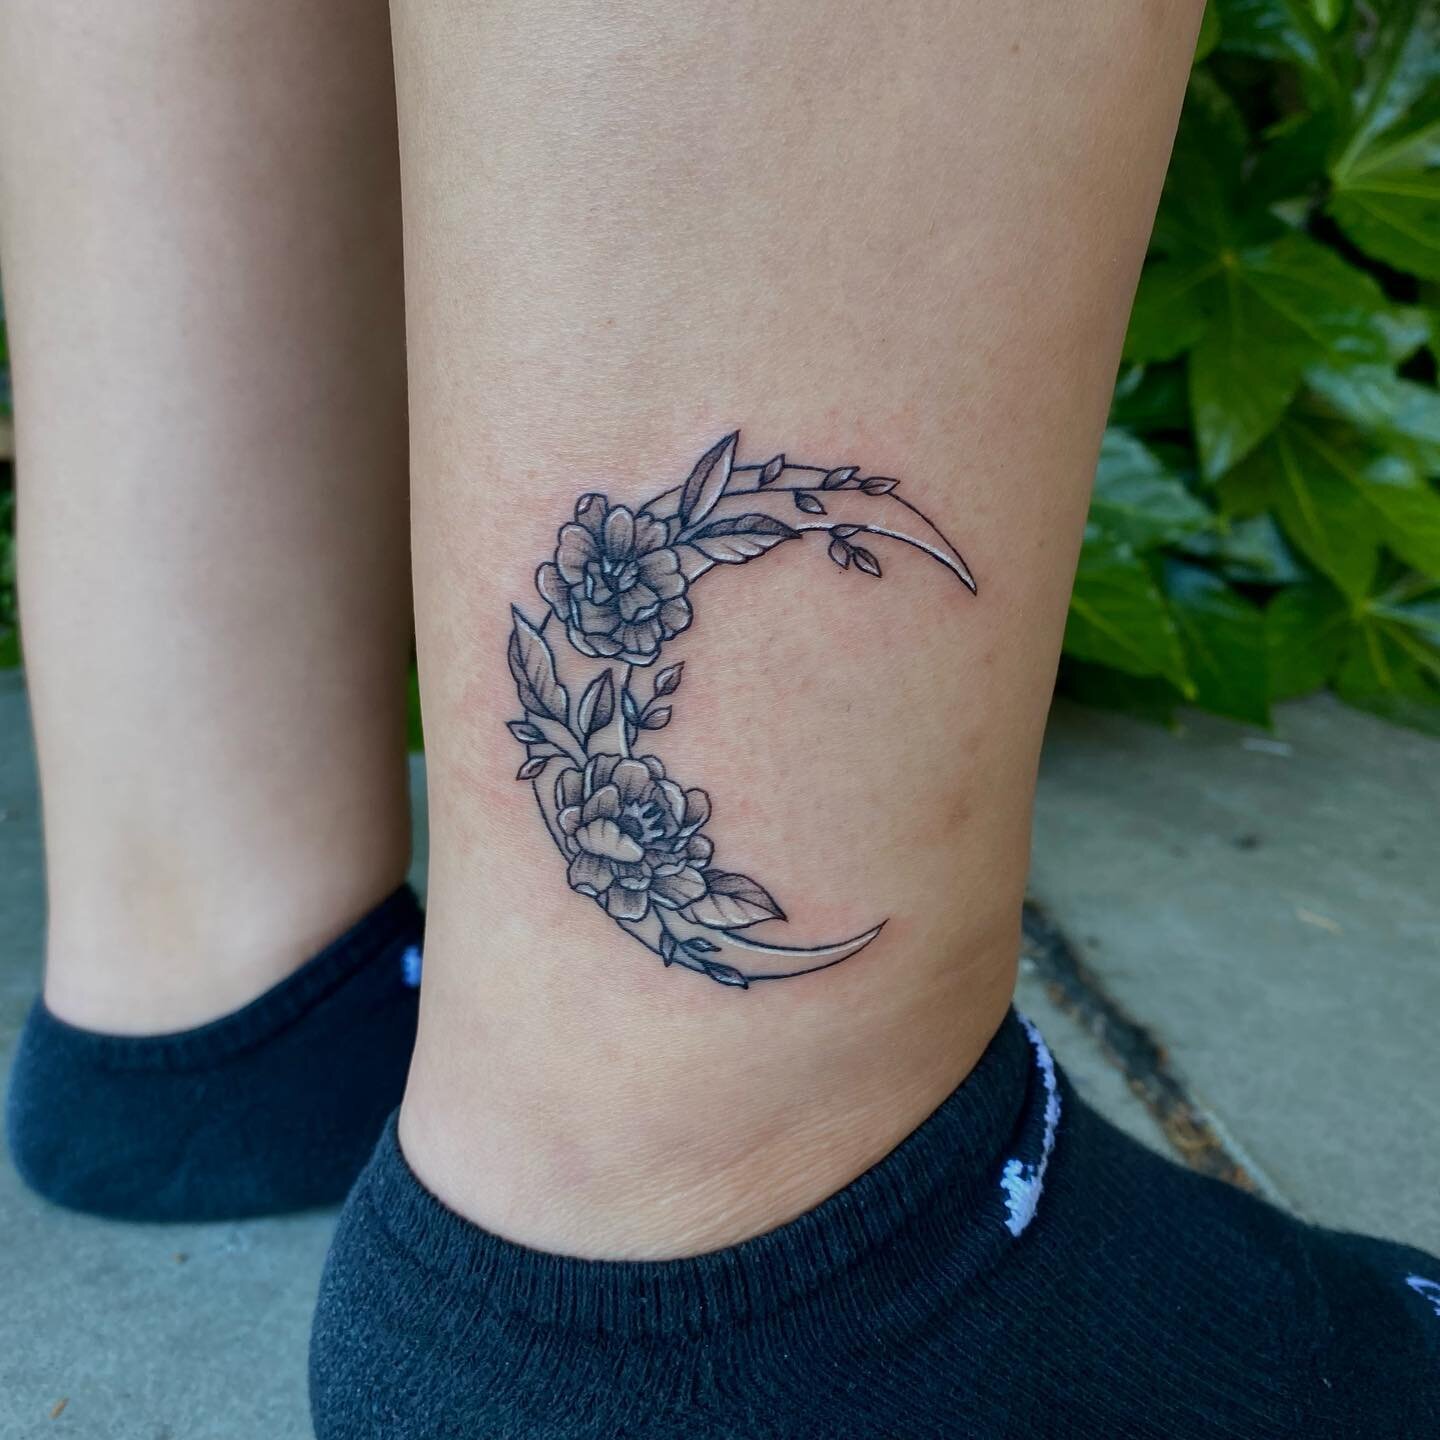 Very proud of this one 🌙🌸 Thanks to Dominique for the trust!